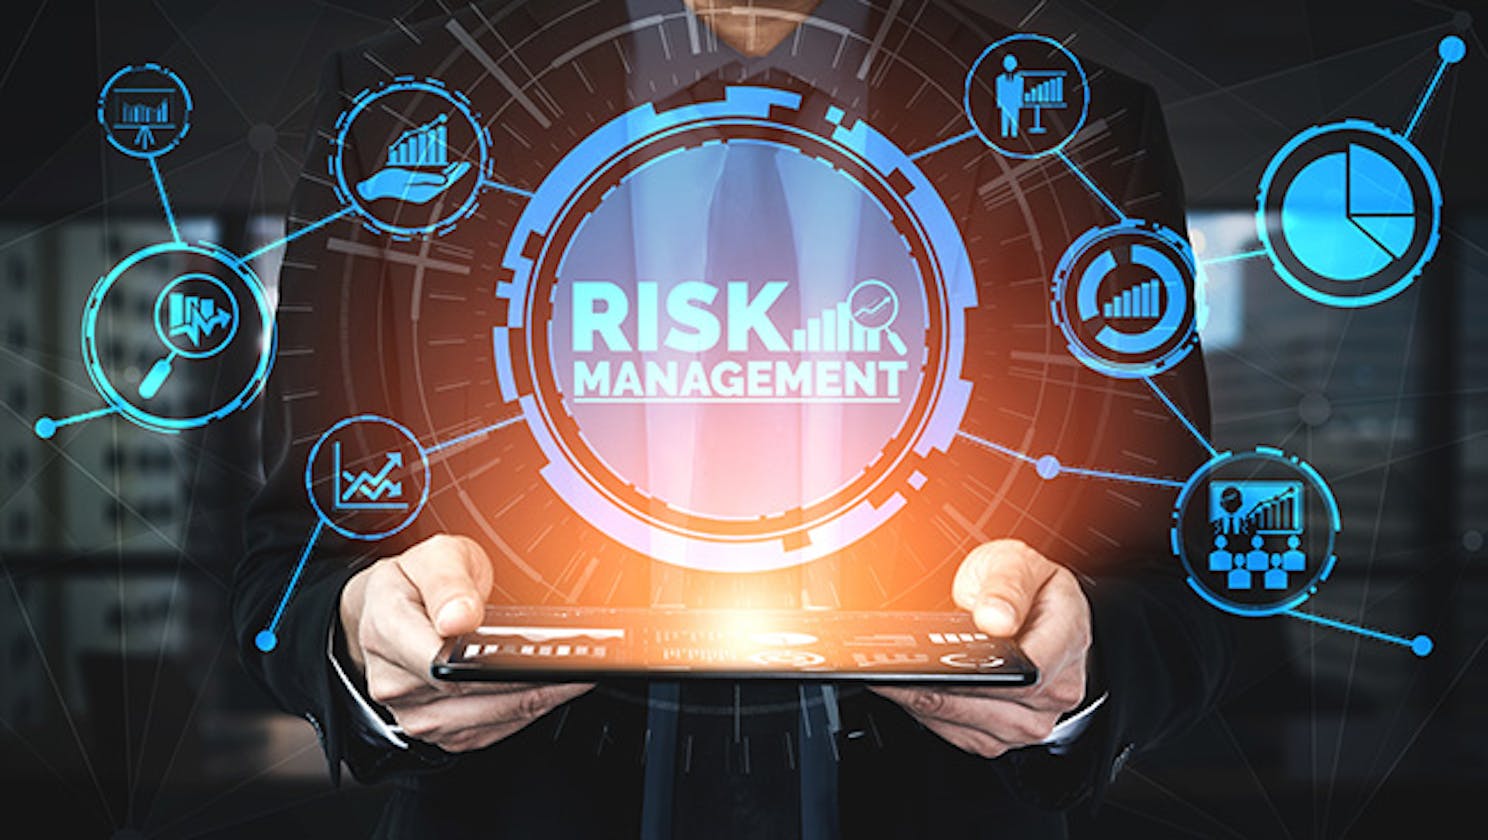 Alpha Recon: The solution to security risk management